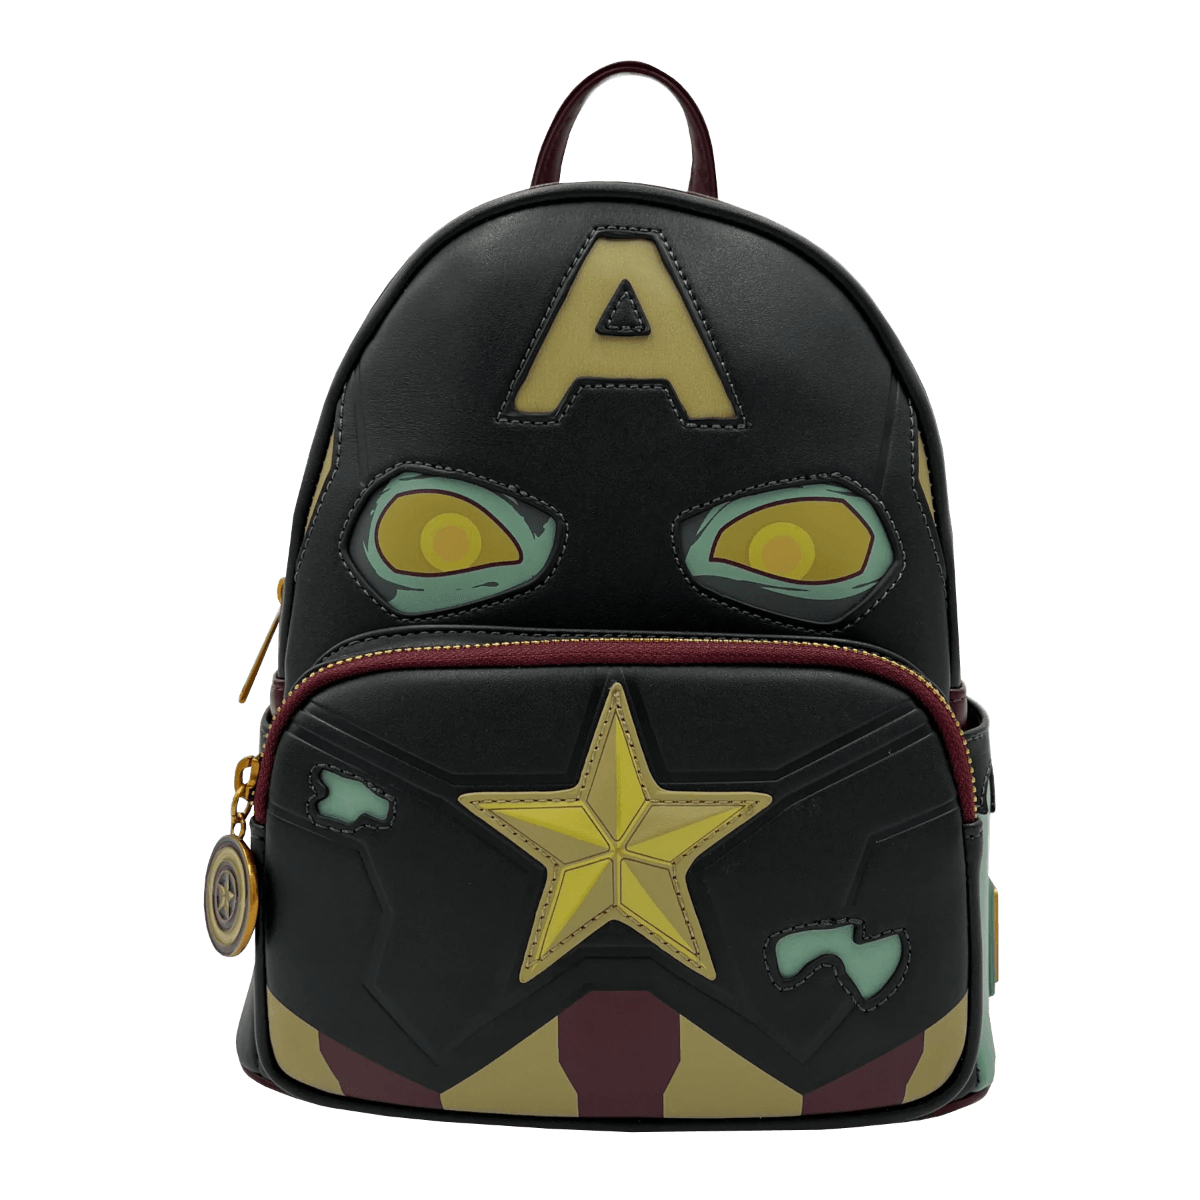 LOUMVBK0227 What If - Zombie Captain America Backpack - Loungefly - Titan Pop Culture